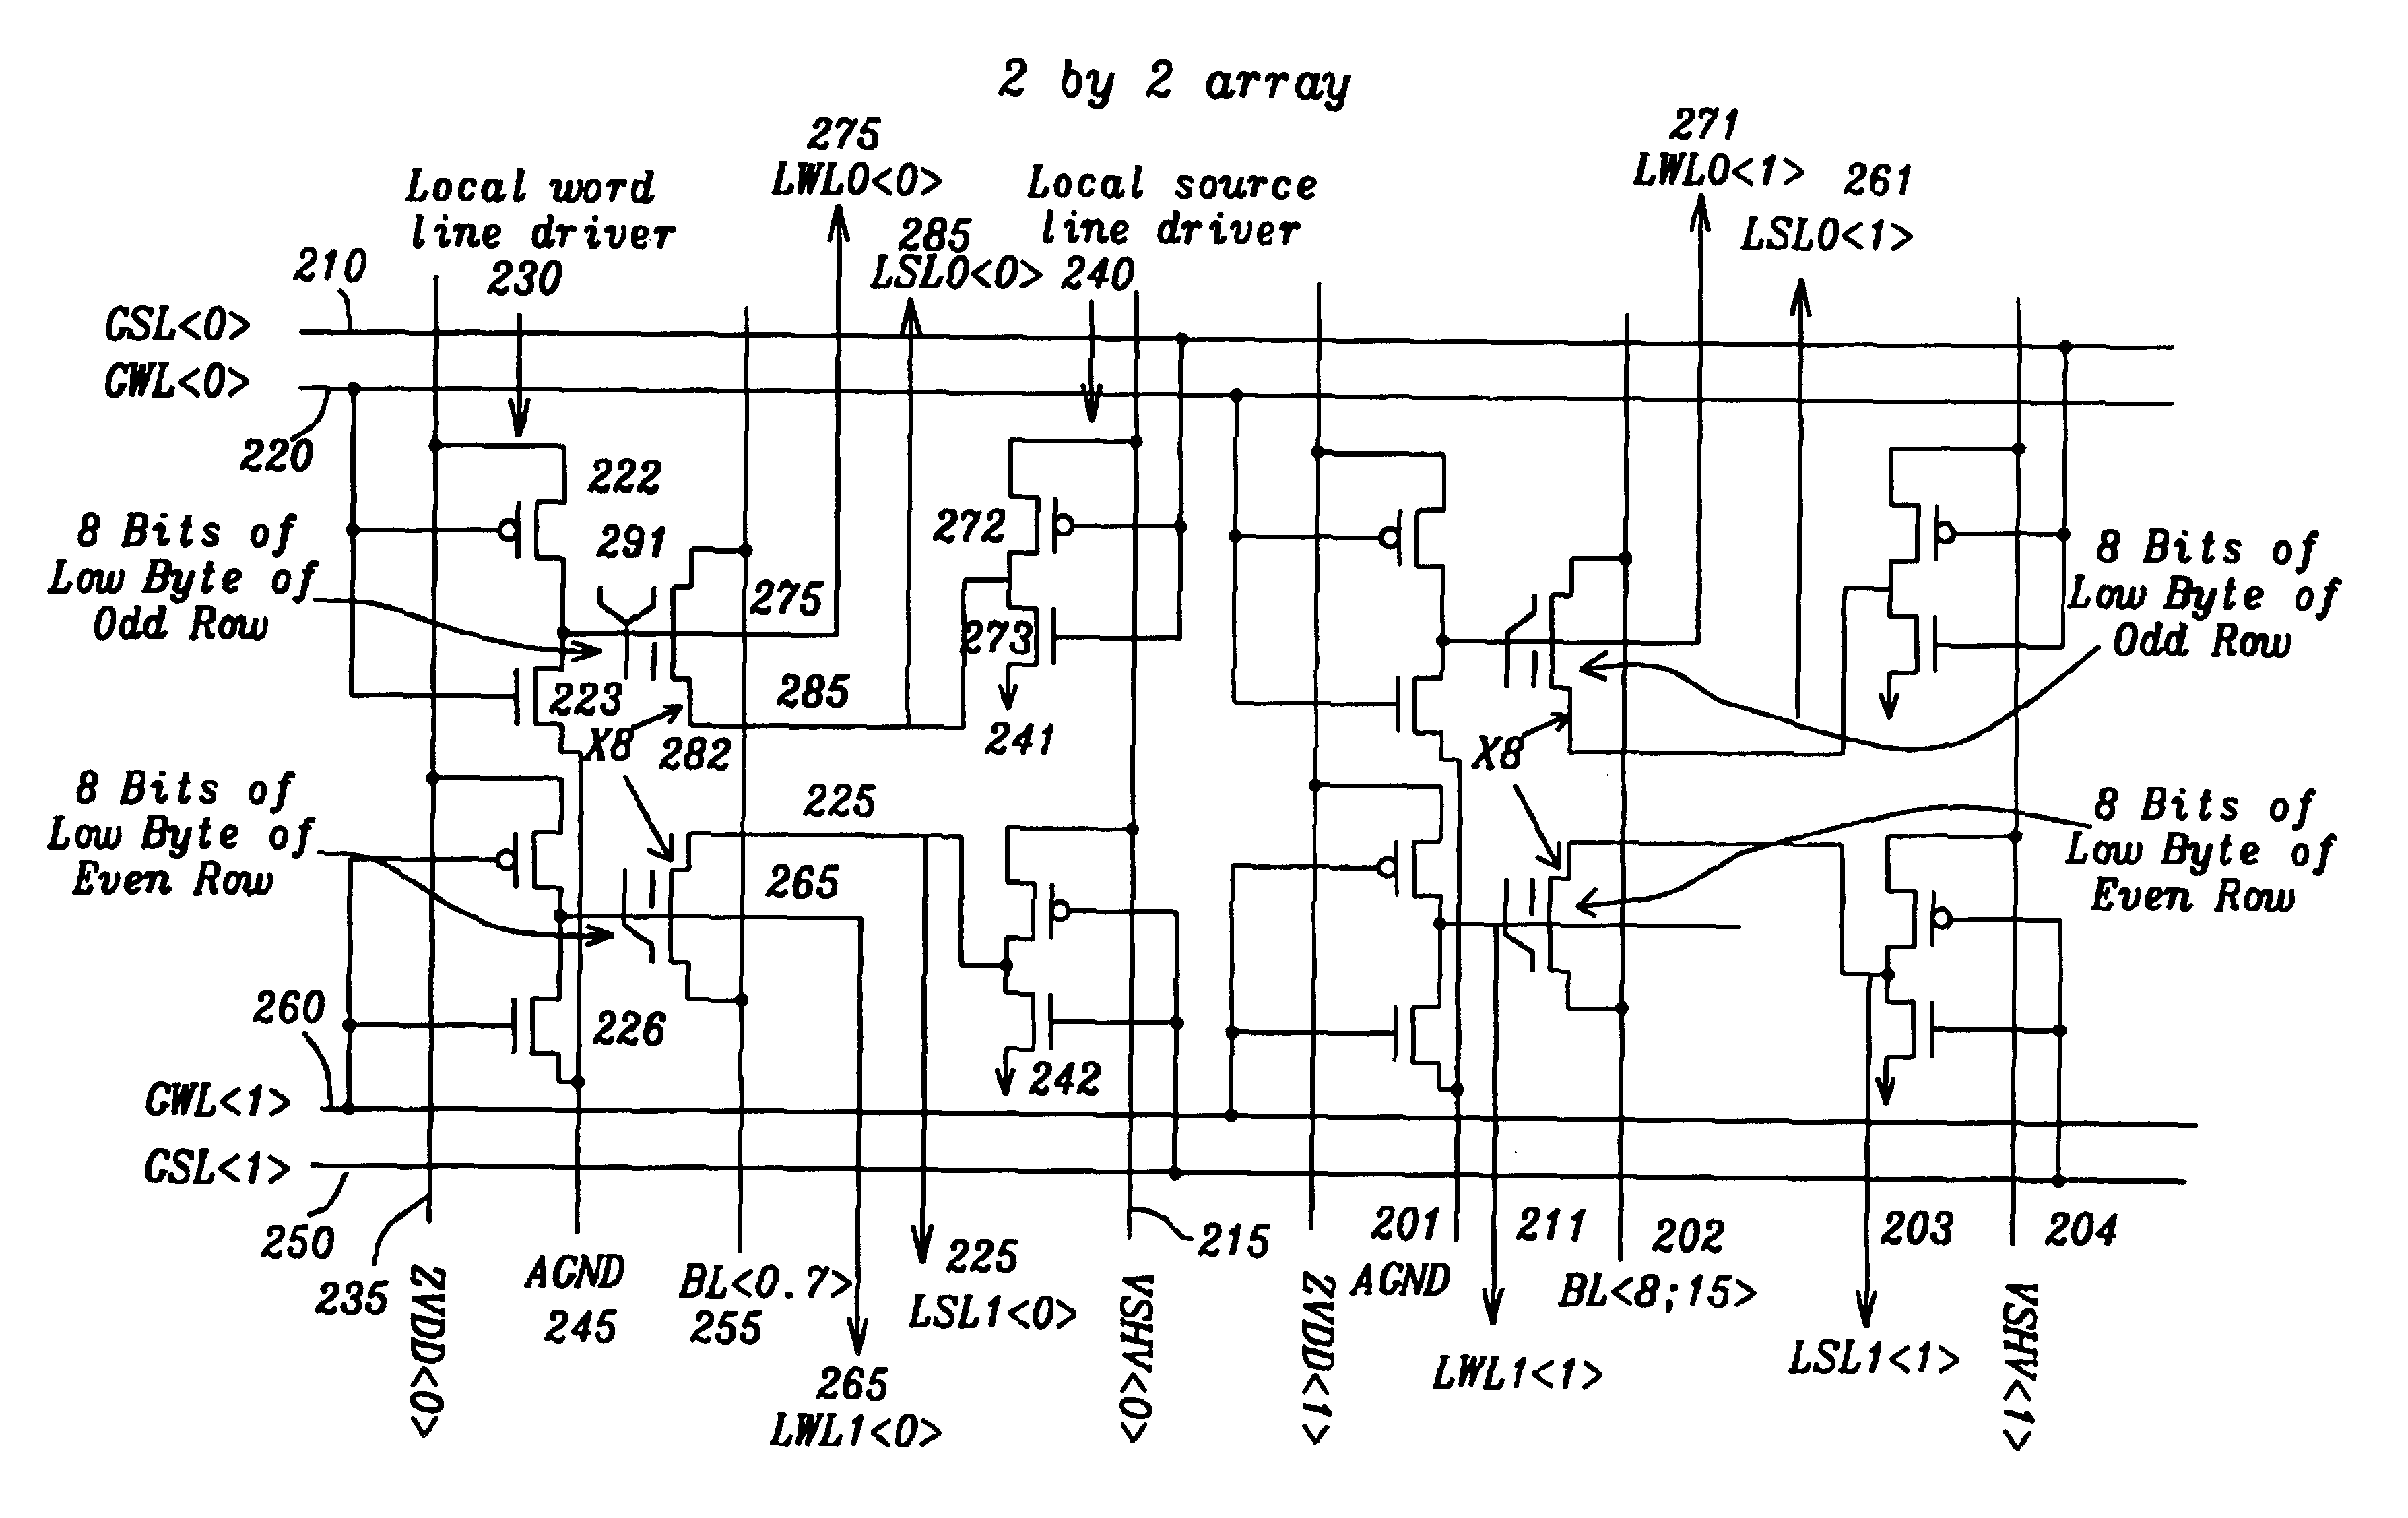 Nonvolatile semiconductor memory array with byte-program, byte-erase, and byte-read capabilities